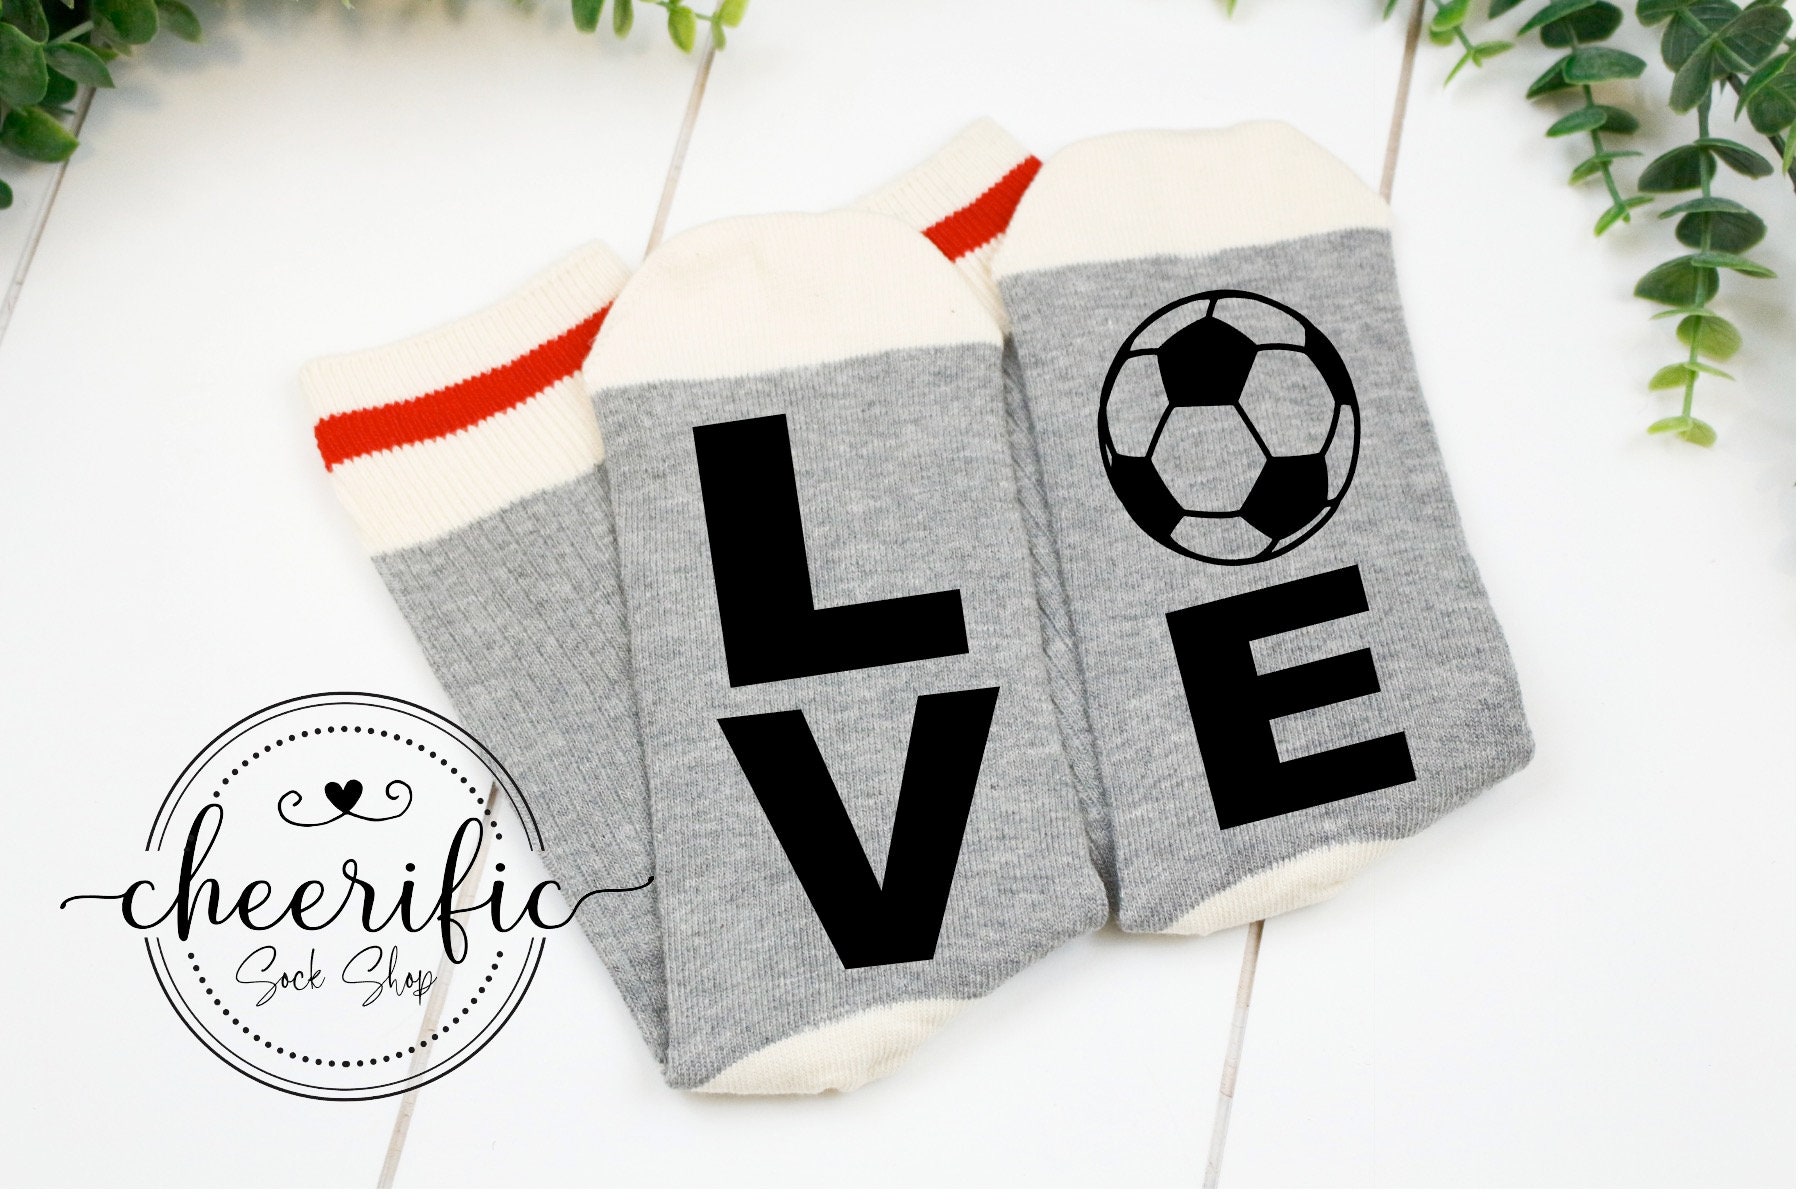 20 AWESOME Kids Gifts Under 20 Dollars - The Soccer Mom Blog